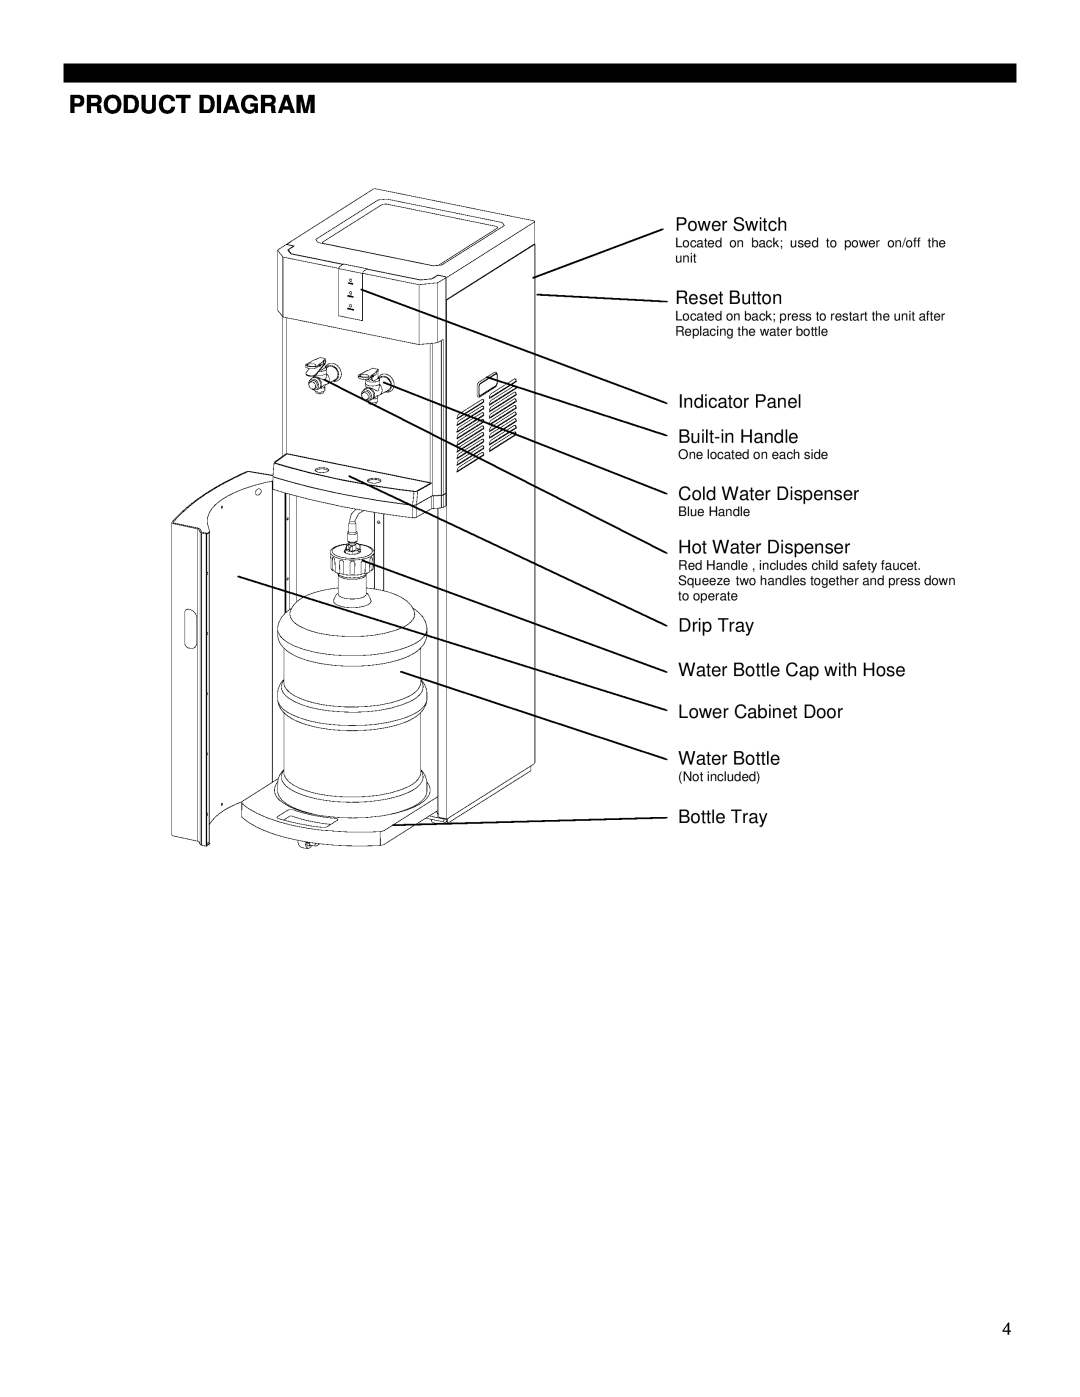 Soleus Air WA1-02-21 Product Diagram, Power Switch, Reset Button, Indicator Panel Built-in Handle, Cold Water Dispenser 